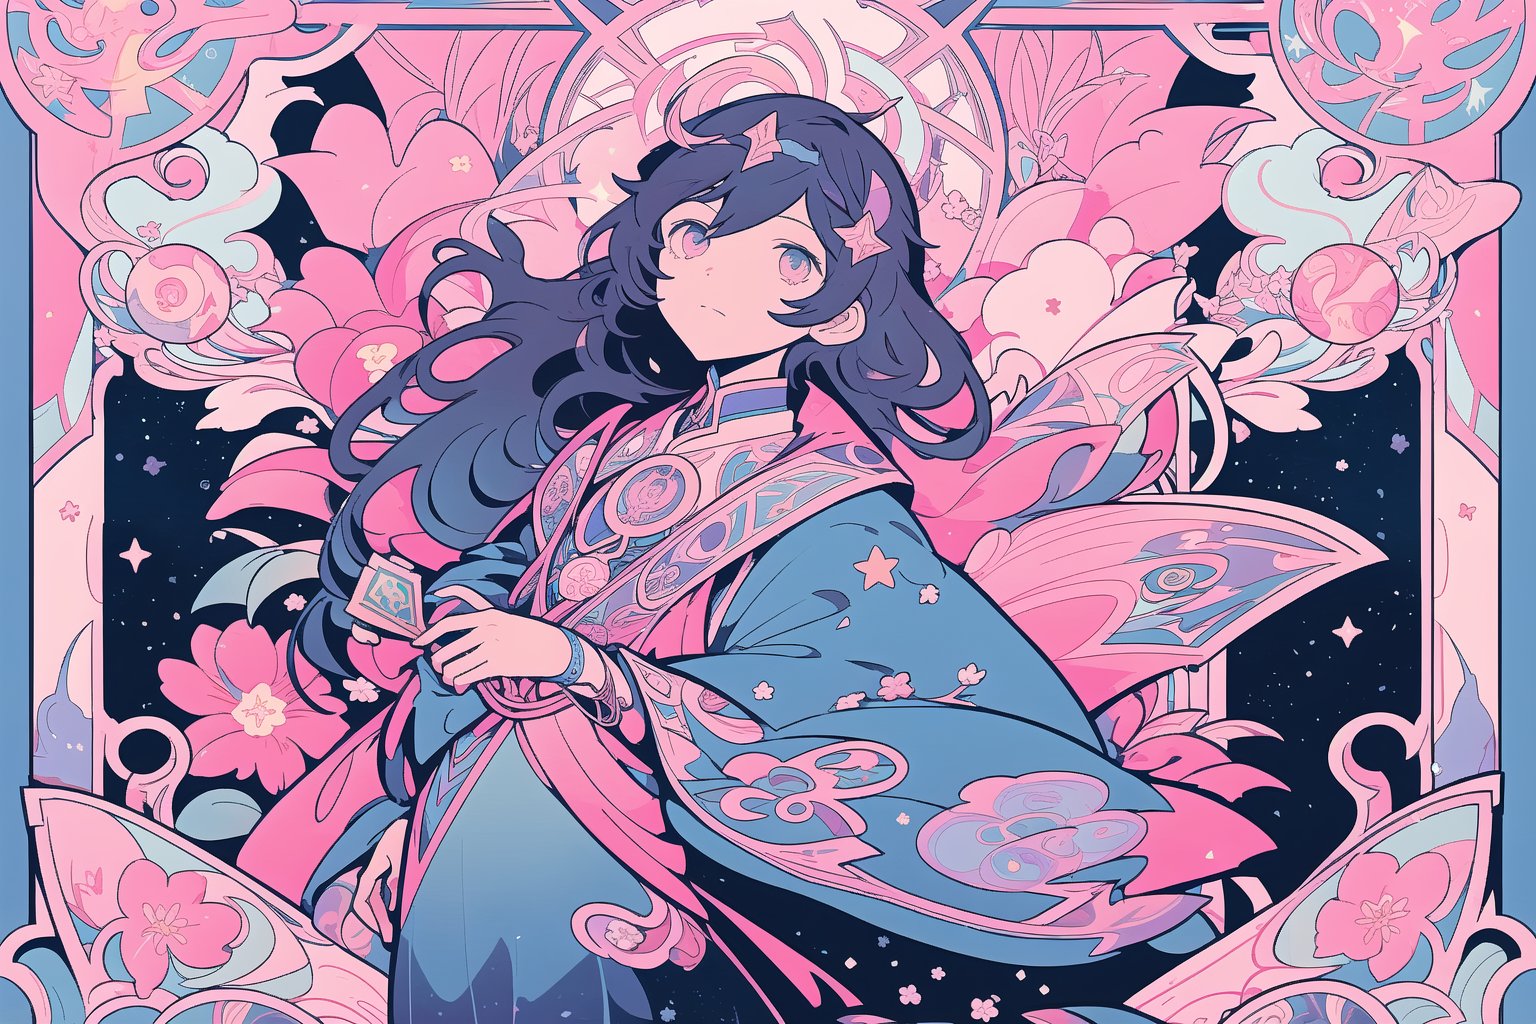 (alfonse mucha tarot), (art noveau style), borders, banner, ((no person, no character) wellcoming to a world, (anime style), (perfect shapes) ultra high quality, pink colors and blue colors, but a lil bit other colors, dark, night, (moon on the side), flowers, stars, portrait